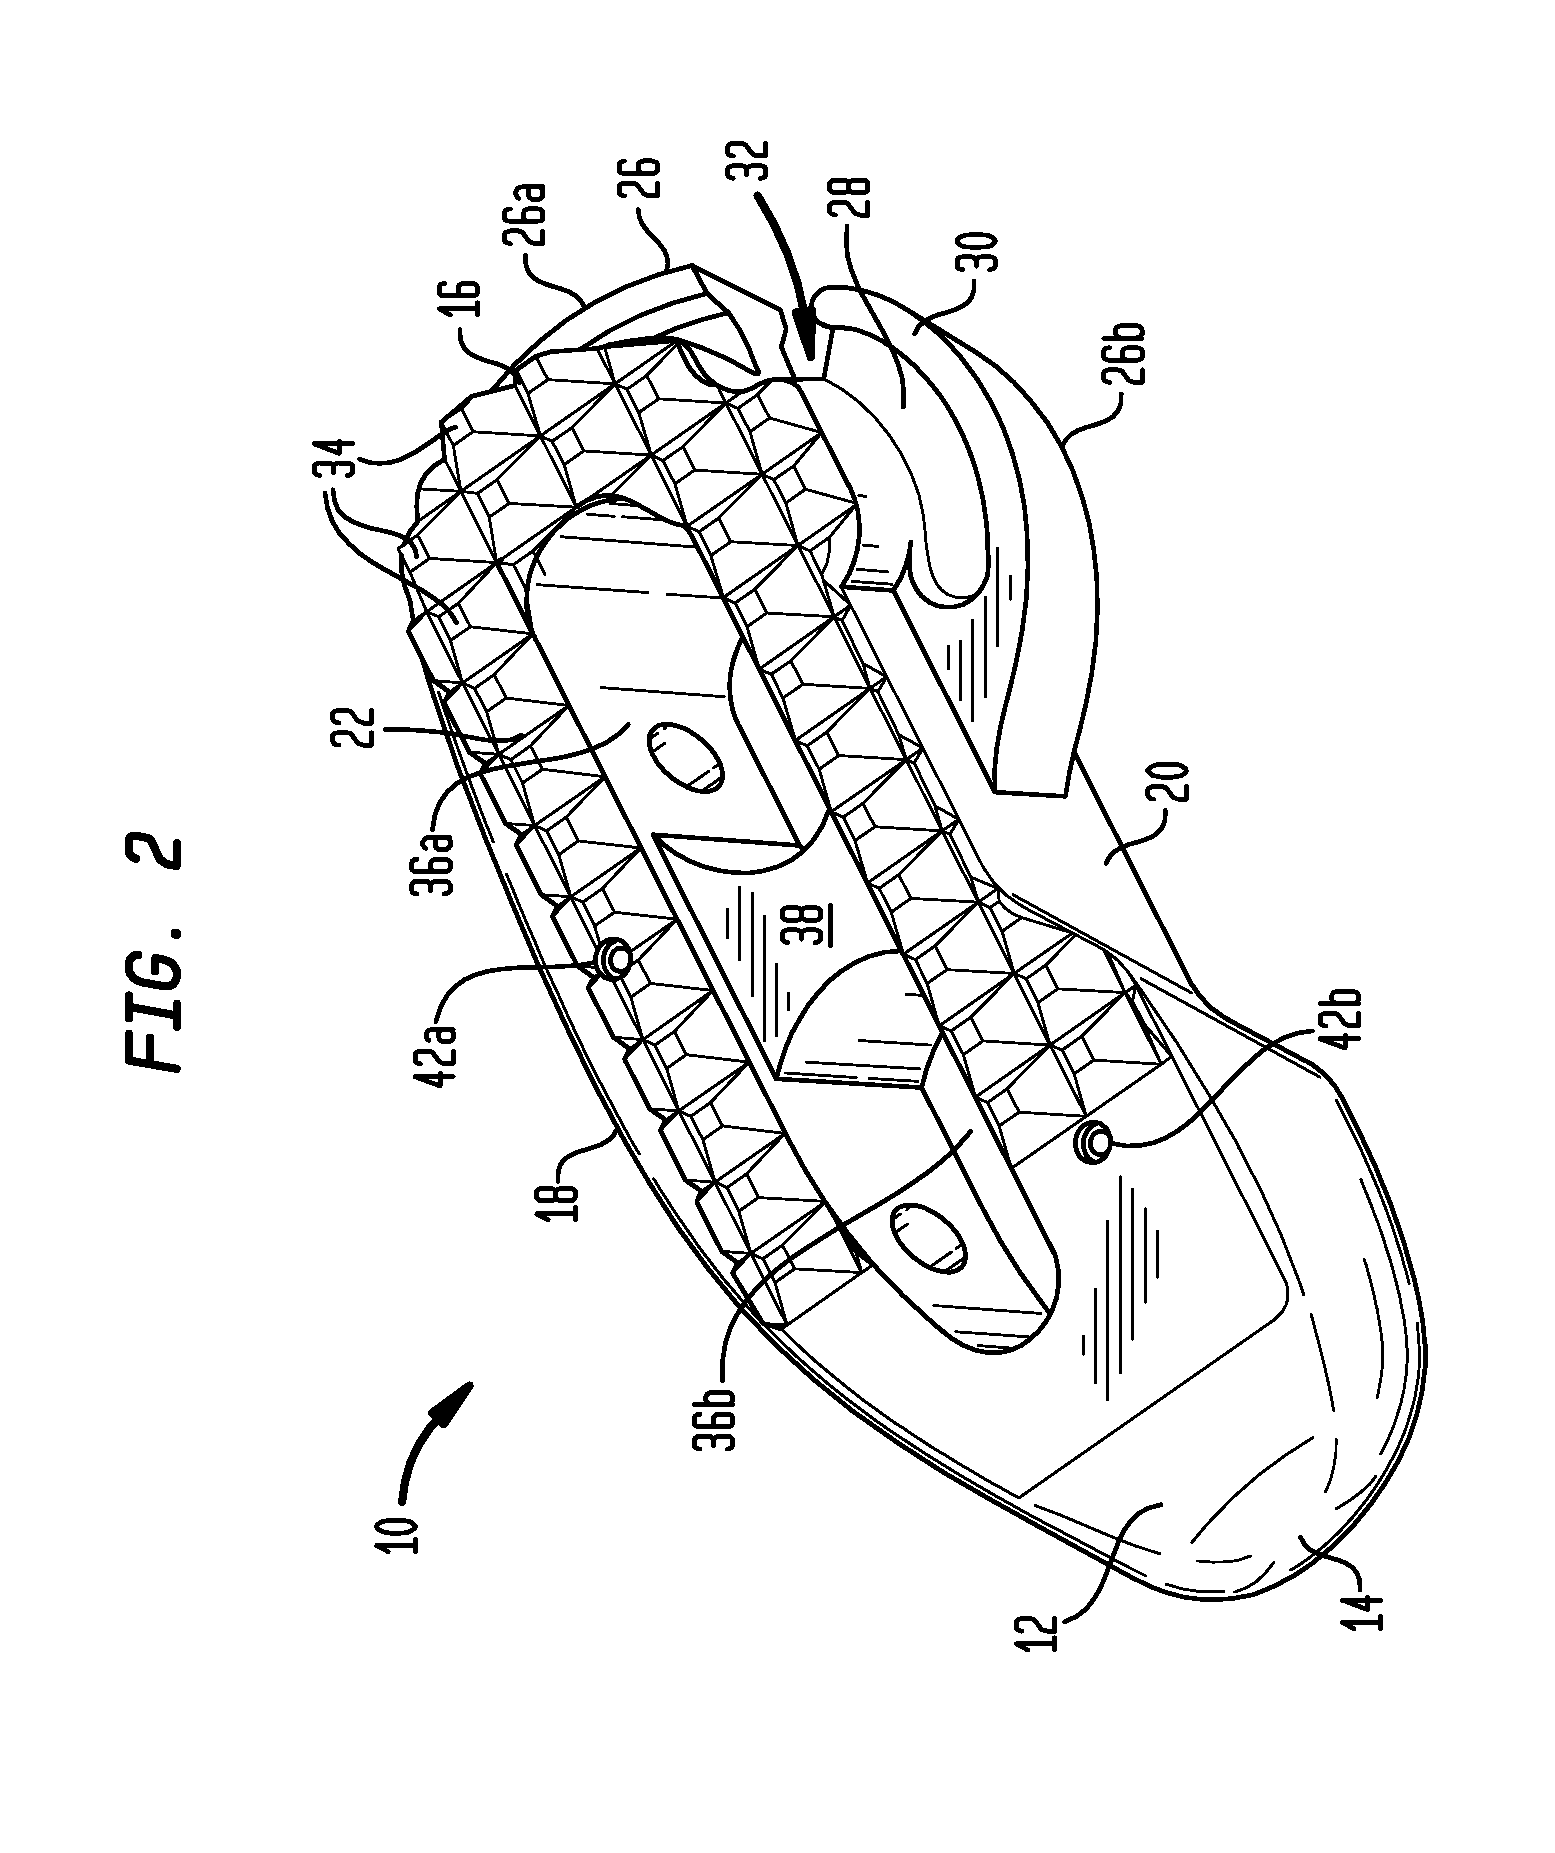 Surgical implant with guiding rail